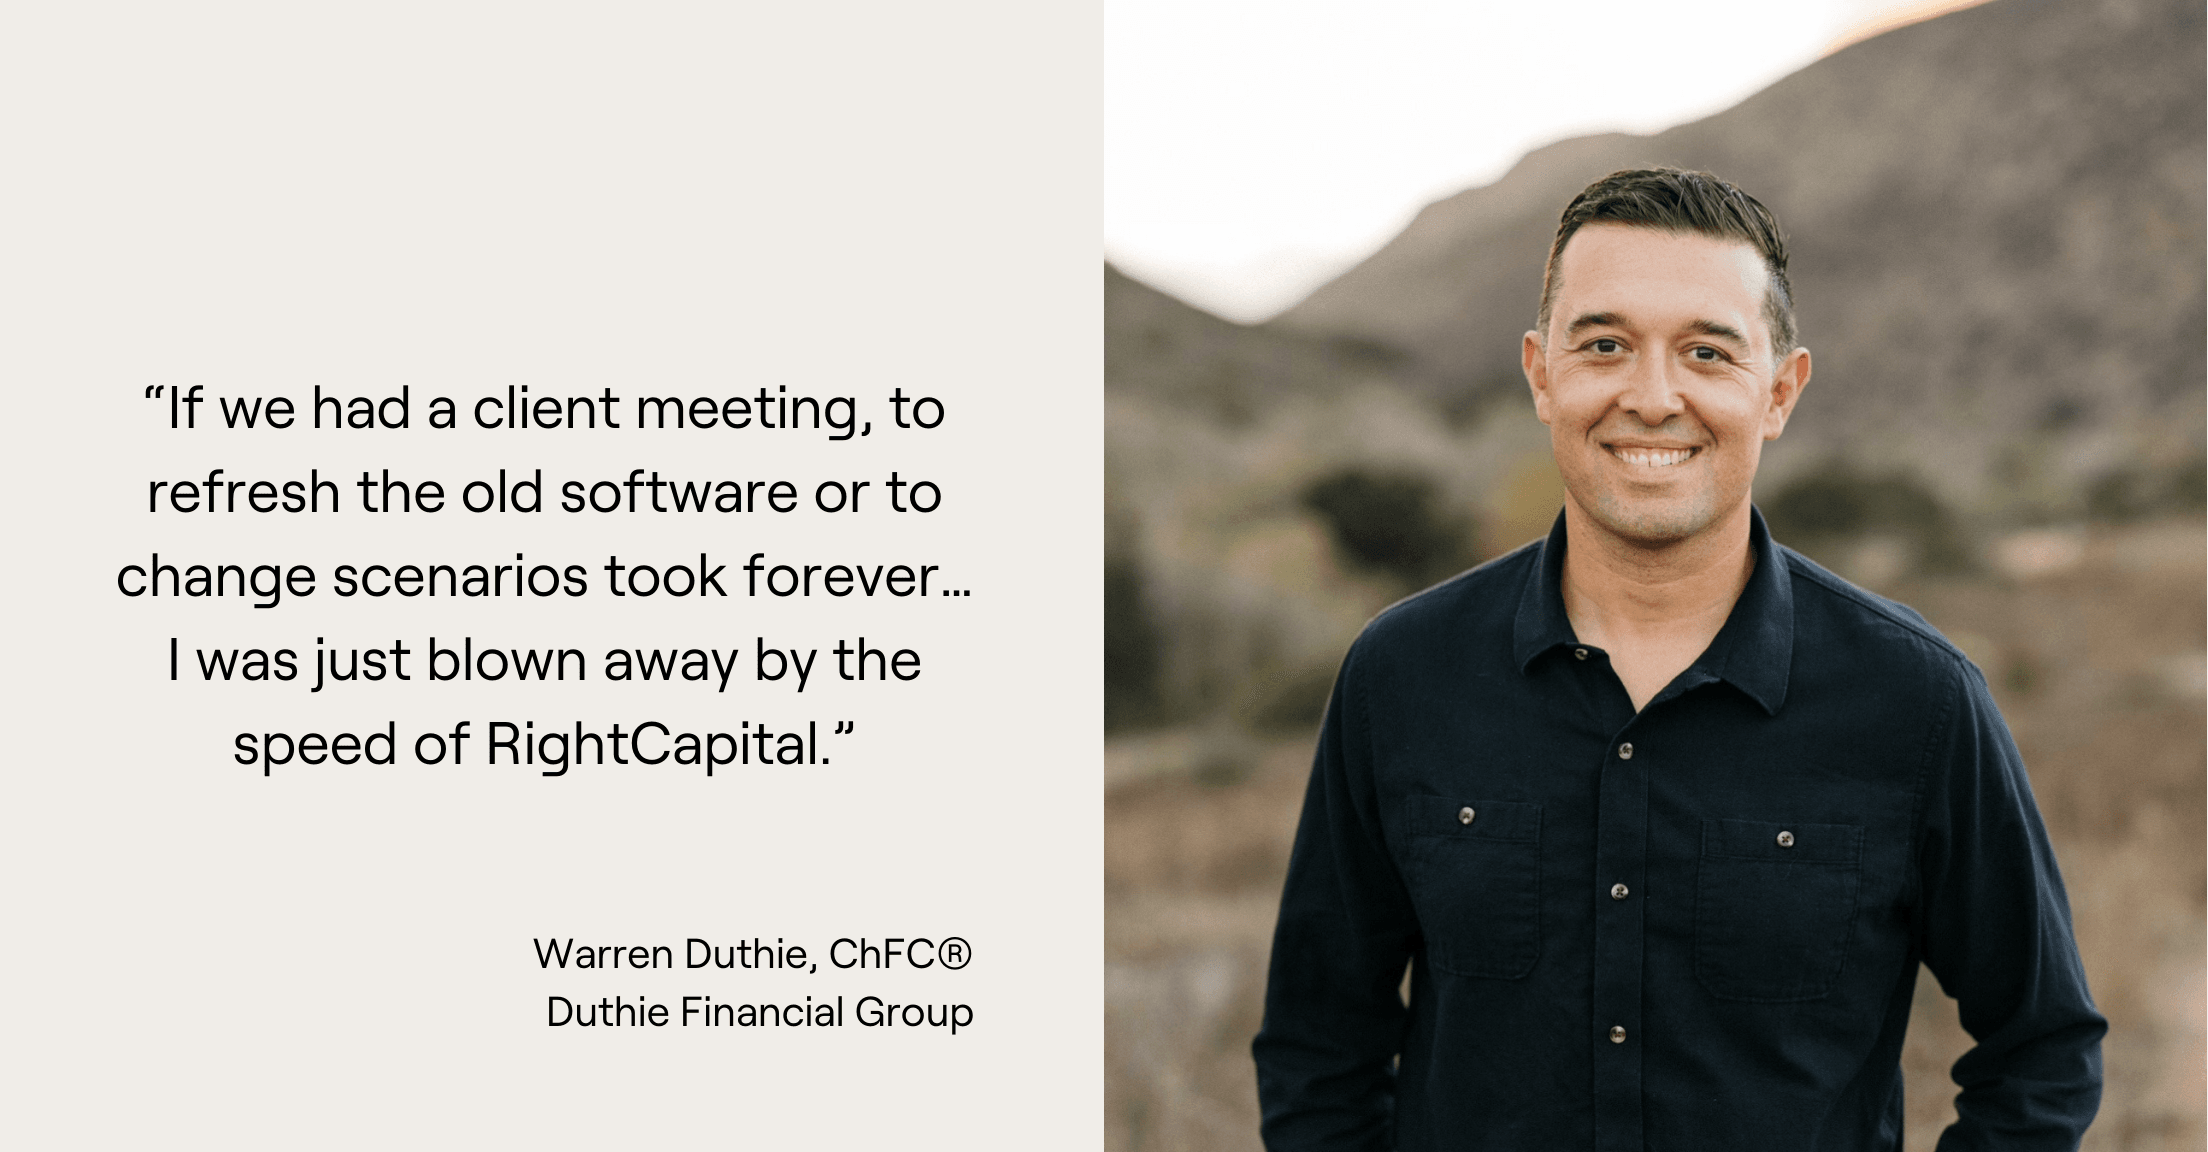 Warren Duthie headshot and quote, “If we had a client meeting, to refresh the old software or to change scenarios took forever…I was just blown away by the speed of RightCapital.”